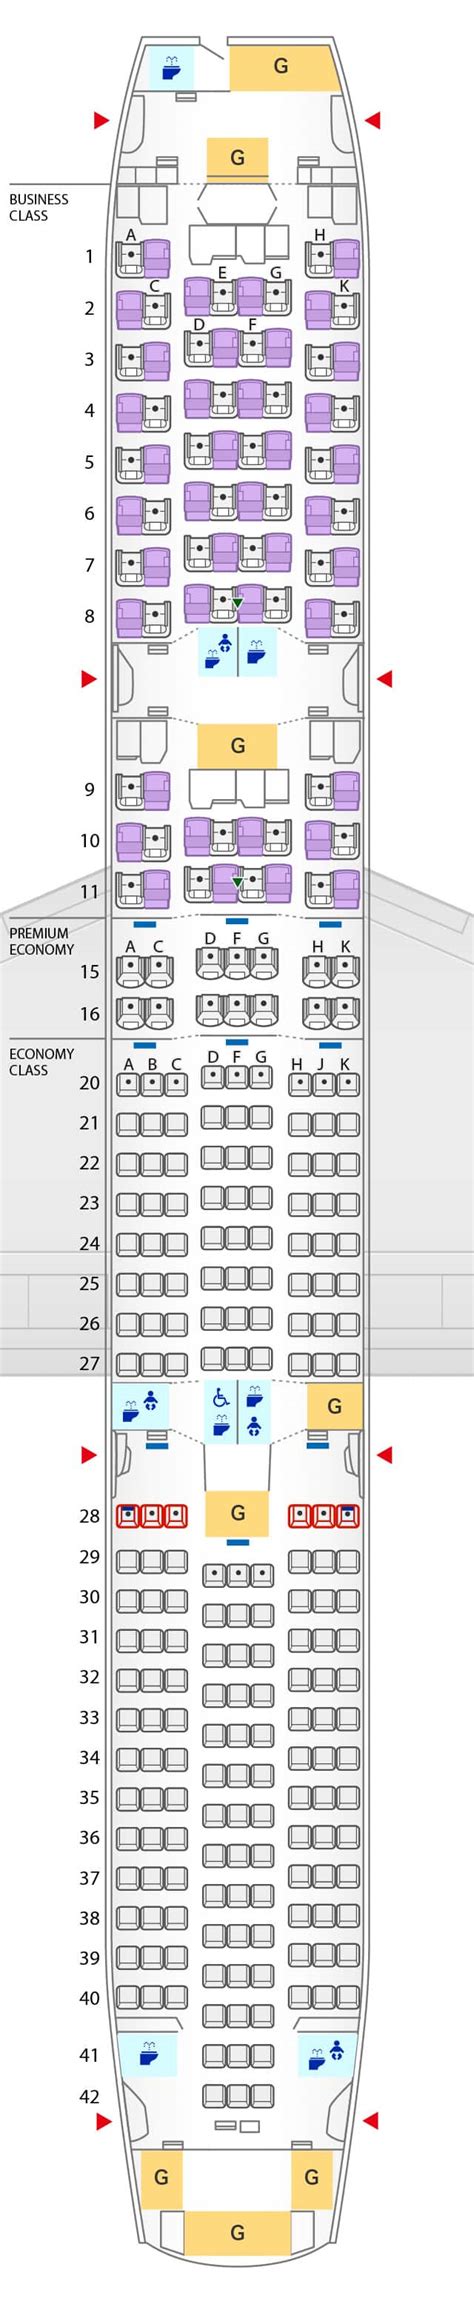 787-9 seat map. Seat Map of Boeing 787-9 (789) On this page, you will find seat map information on the Boeing 787-9 (789) aircraft. Reserve Seats. Book Now. 246 Seats. 215 Seats. 